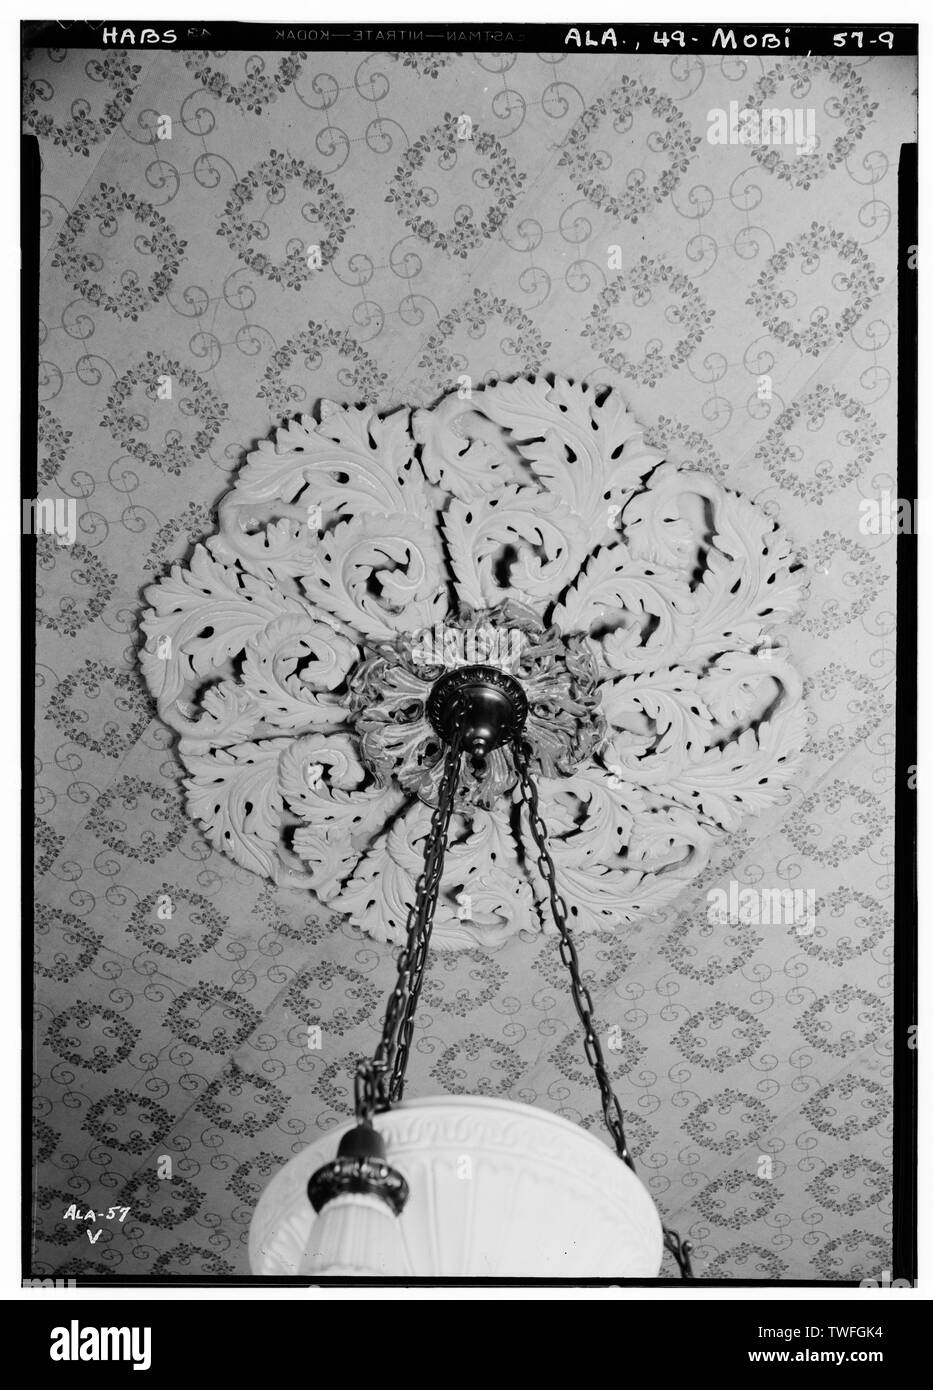 Historic American Buildings Survey E. W. Russell, Photographer, February 5, 1937 PLASTER ORNAMENT ON CEILING IN LIVING ROOM - Judge Oliver J. Semmes House, 2828 Dauphin Way, Mobile, Mobile County, AL Stock Photo